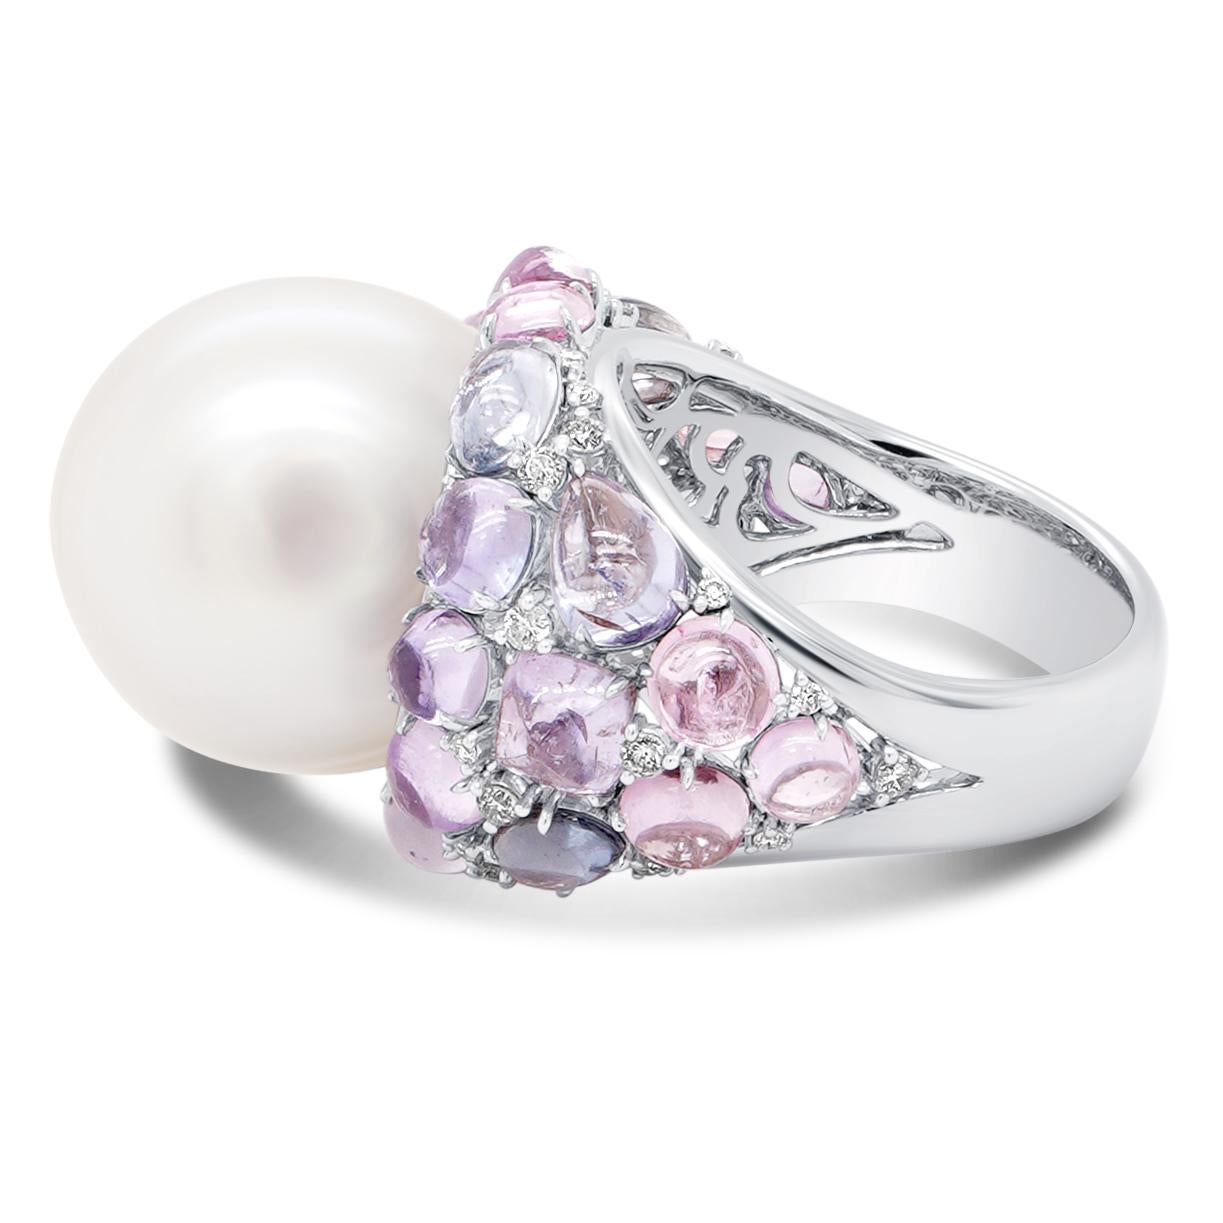 Round Cut 28 Carat South Sea Pearl Studded With 8 Carat No Heat Sapphire 18K Designer Ring For Sale